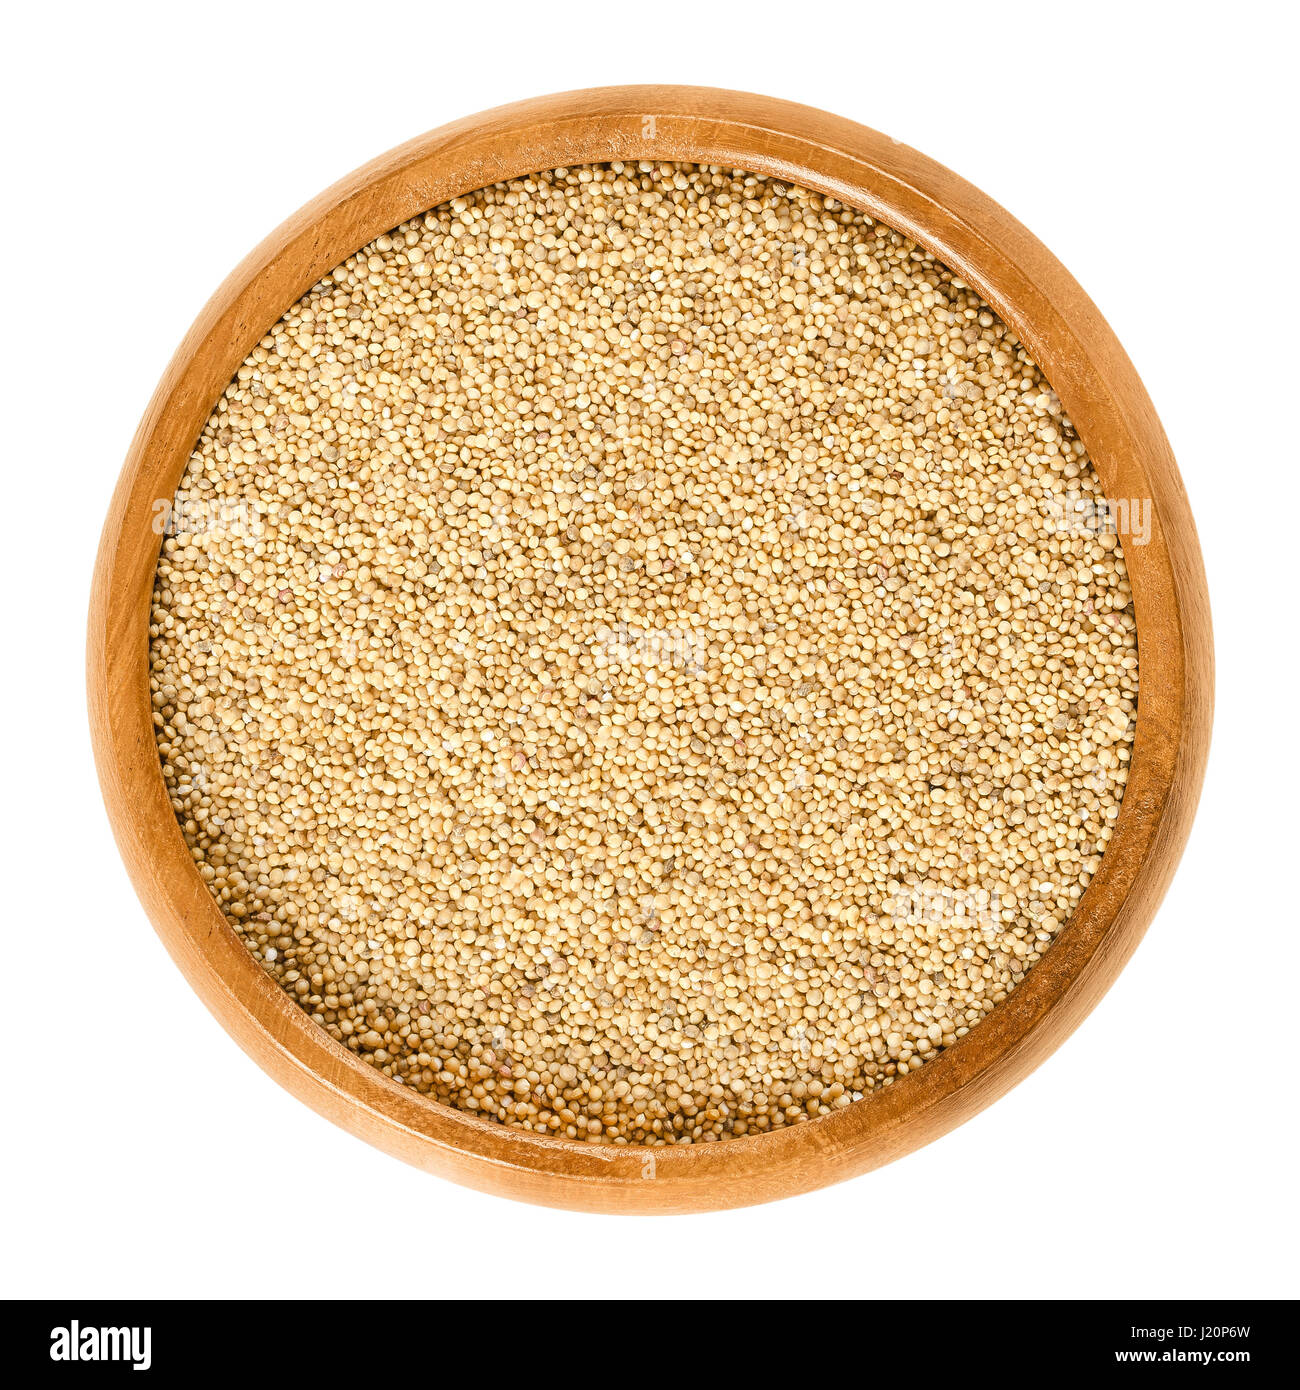 Amaranth grain in wooden bowl. Amaranthus, pseudocereal and staple food of the Aztec, banned by the conquistadores. Sold in health food shops. Stock Photo